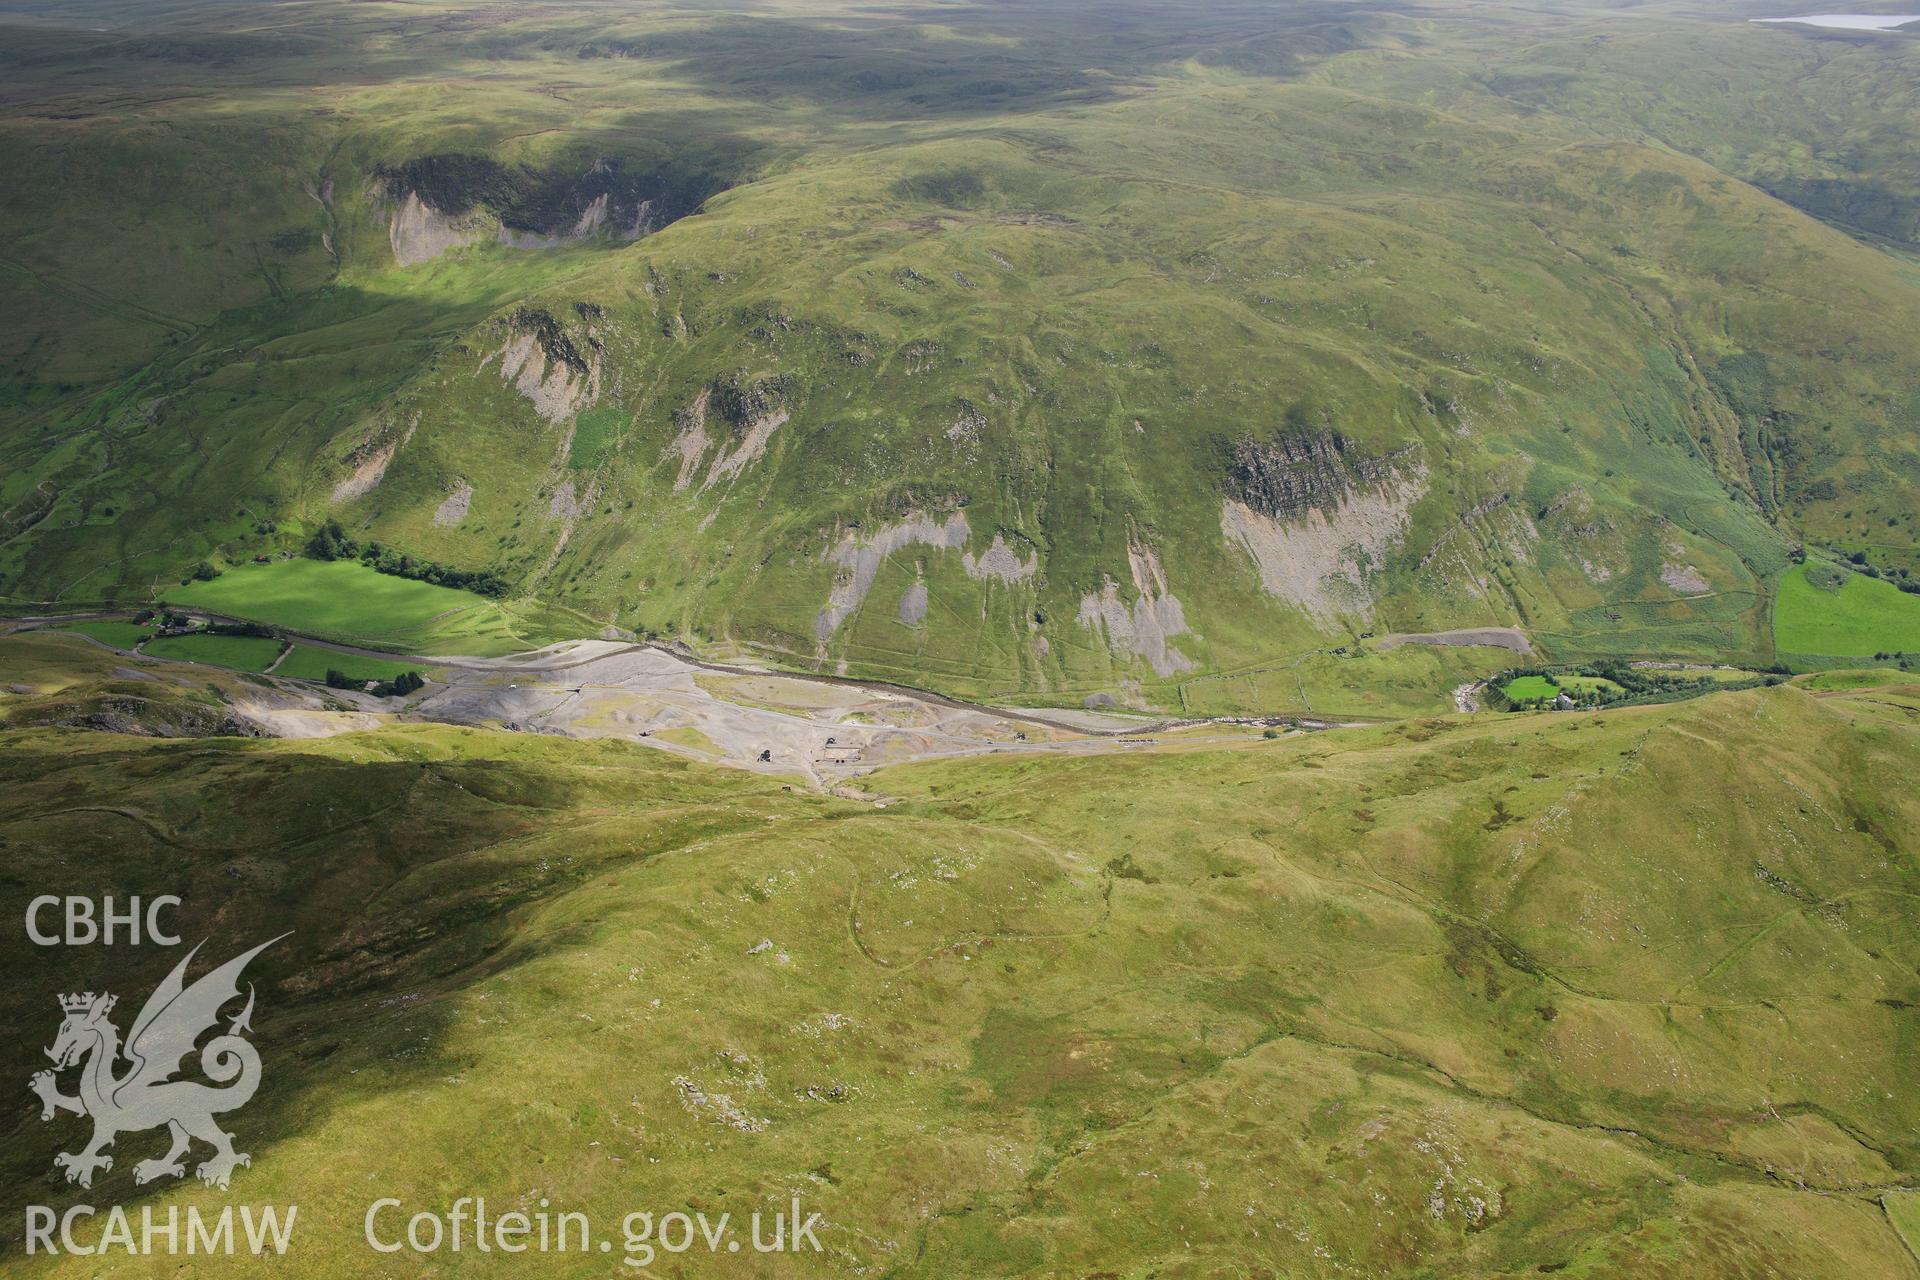 RCAHMW colour oblique photograph of Copa Hill, Cwmystwyth Lead, Copper and Zinc mines. Taken by Toby Driver on 27/07/2012.